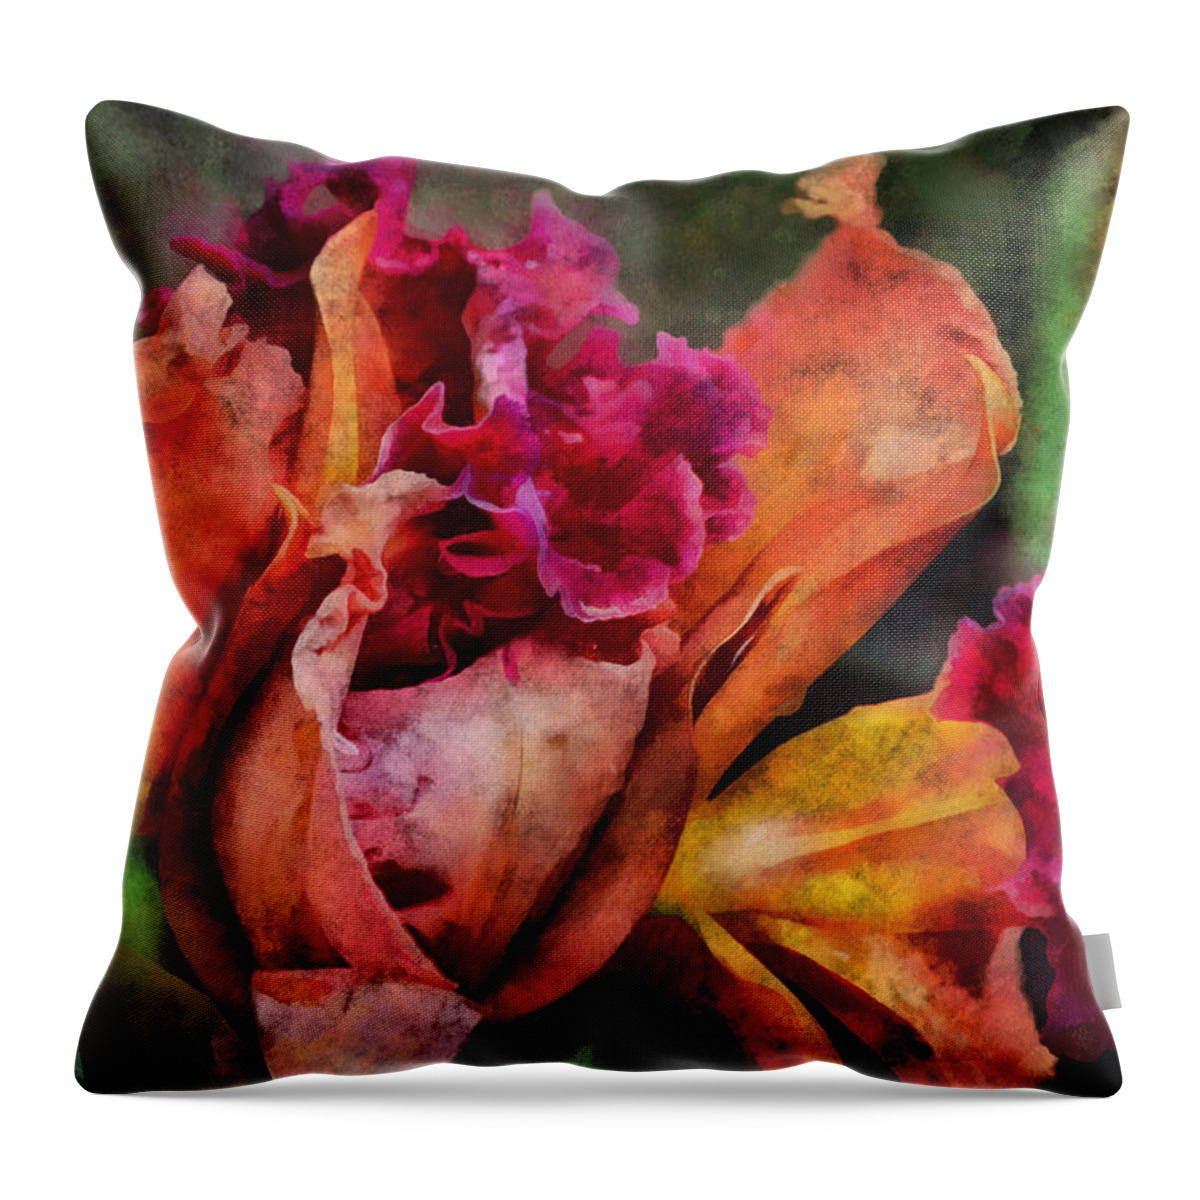 Flower Throw Pillow featuring the mixed media Beauty Of An Orchid by Trish Tritz